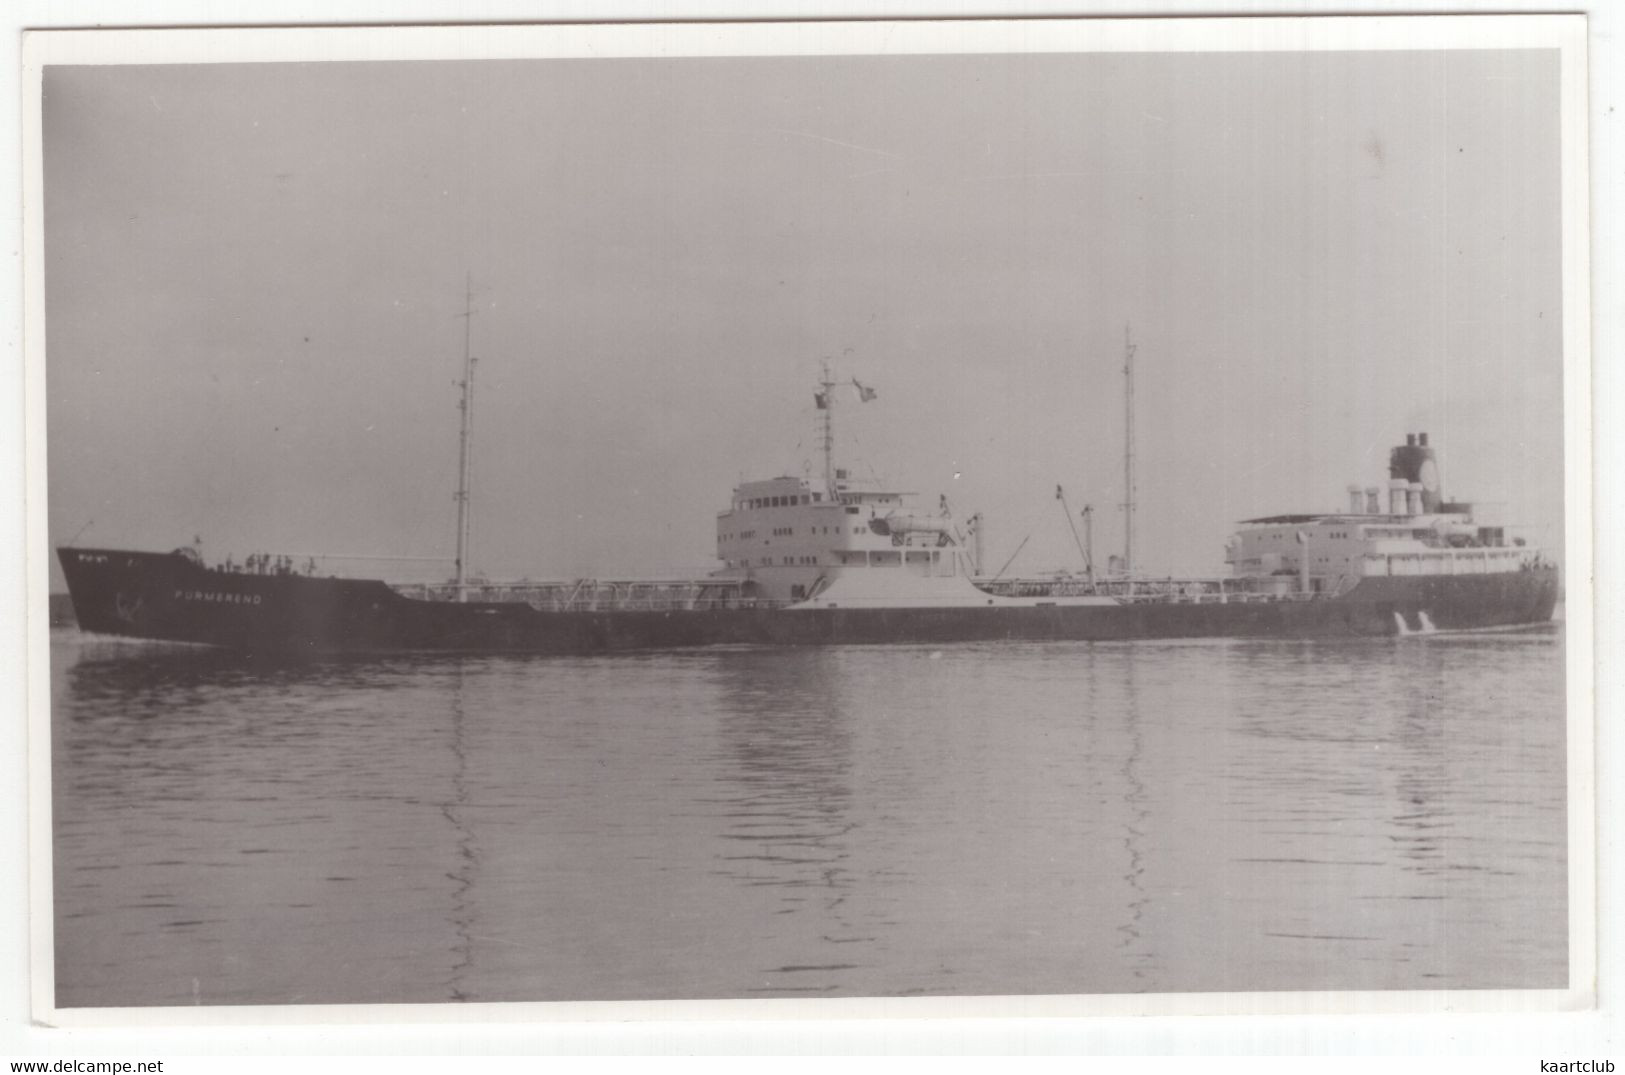 MS 'PURMEREND' - 1957 - Cargo Vessel - Boats